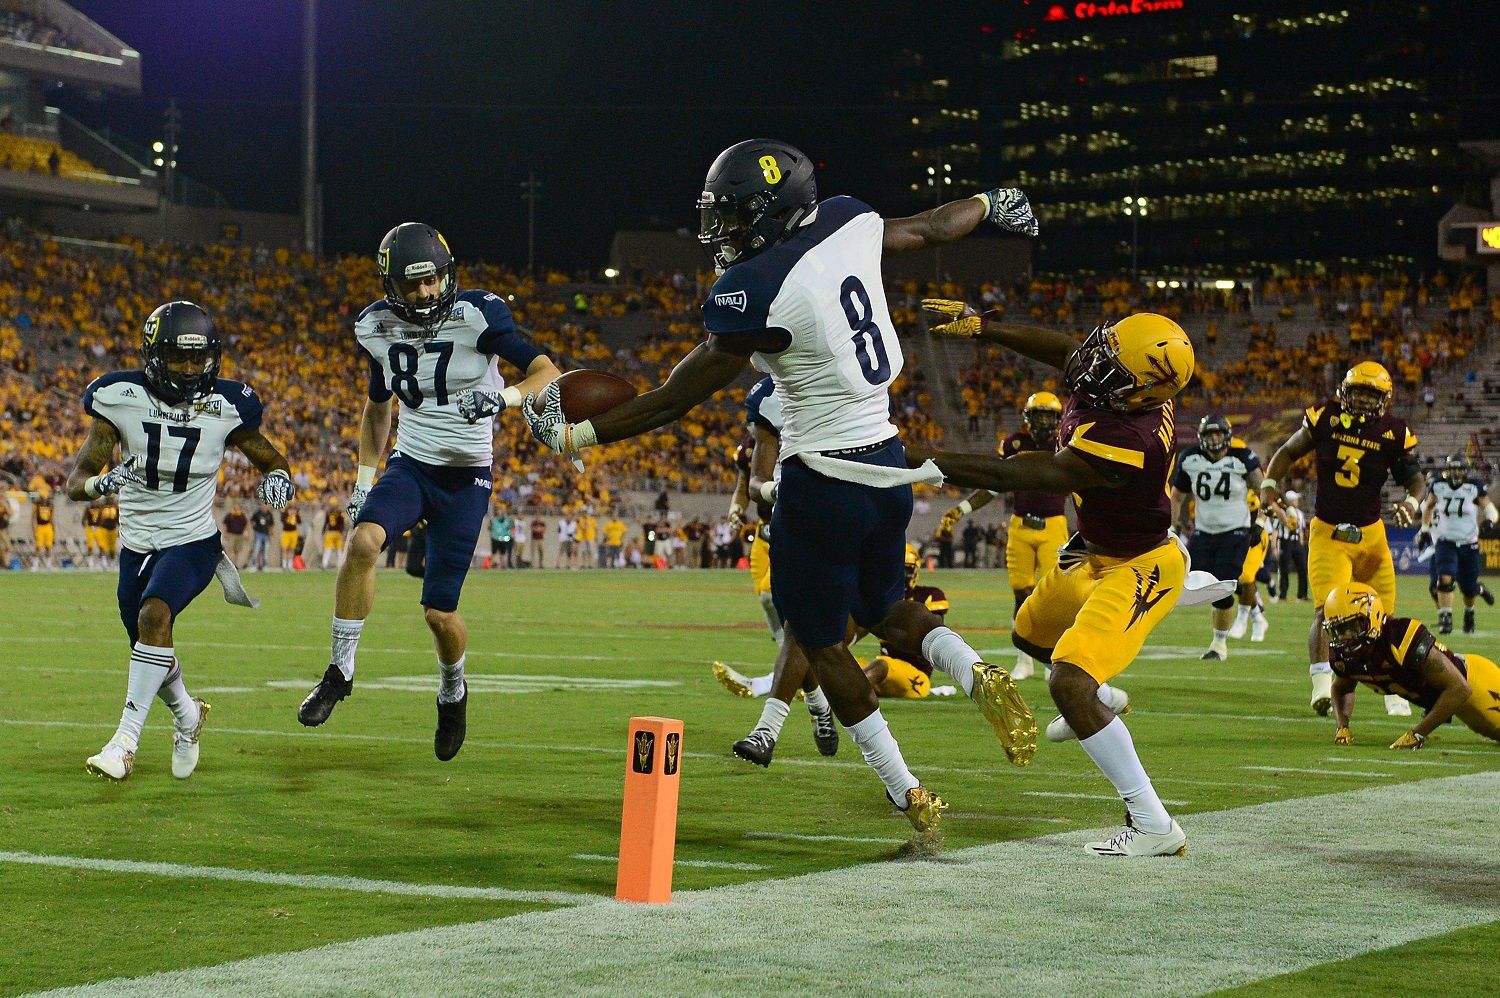 TEMPE, AZ - SEPTEMBER 03:  Wide receiver Emmanuel Butler #8 of the Northern Arizona Lumberjacks is forced out of bounds by defensive back De'Chavon Hayes #8 of the Arizona State Sun Devils in the first half of the game at Sun Devil Stadium on September 3, 2016 in Tempe, Arizona. The Arizona State Sun Devils won 44-13. (Photo by Jennifer Stewart/Getty Images)